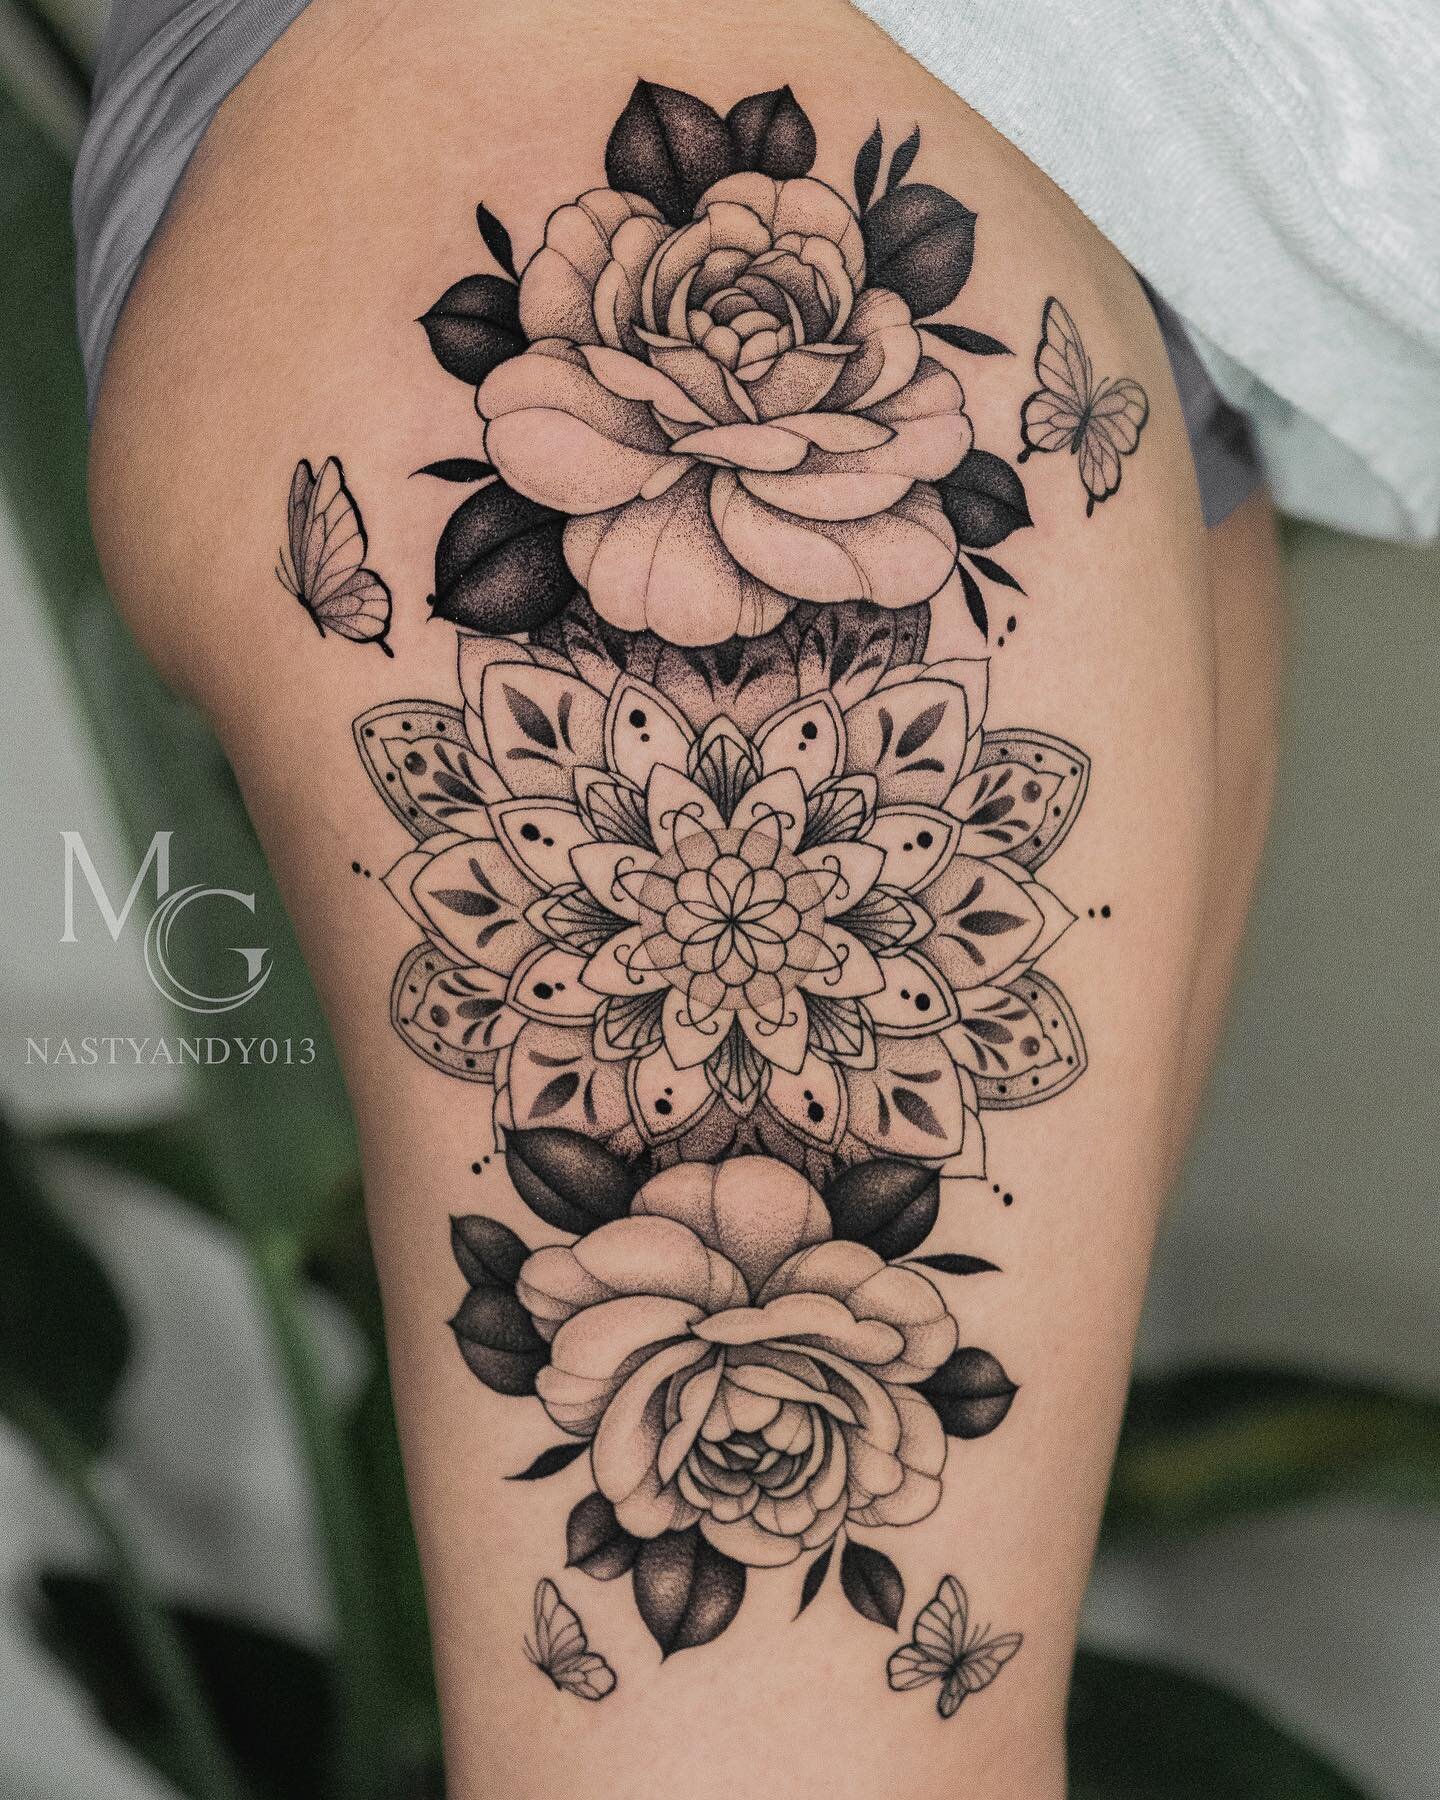 Mandala's embrace, flowers bloom with grace 🌸

Artist: @nastyandy013 

He&rsquo;s currently booking June! Click the link on his bio to book an appointment. 

👉 @nastyandy013 
👉 @nastyandy013 
👉 @nastyandy013 

#flowertattoo #tattoo #flowers #mand